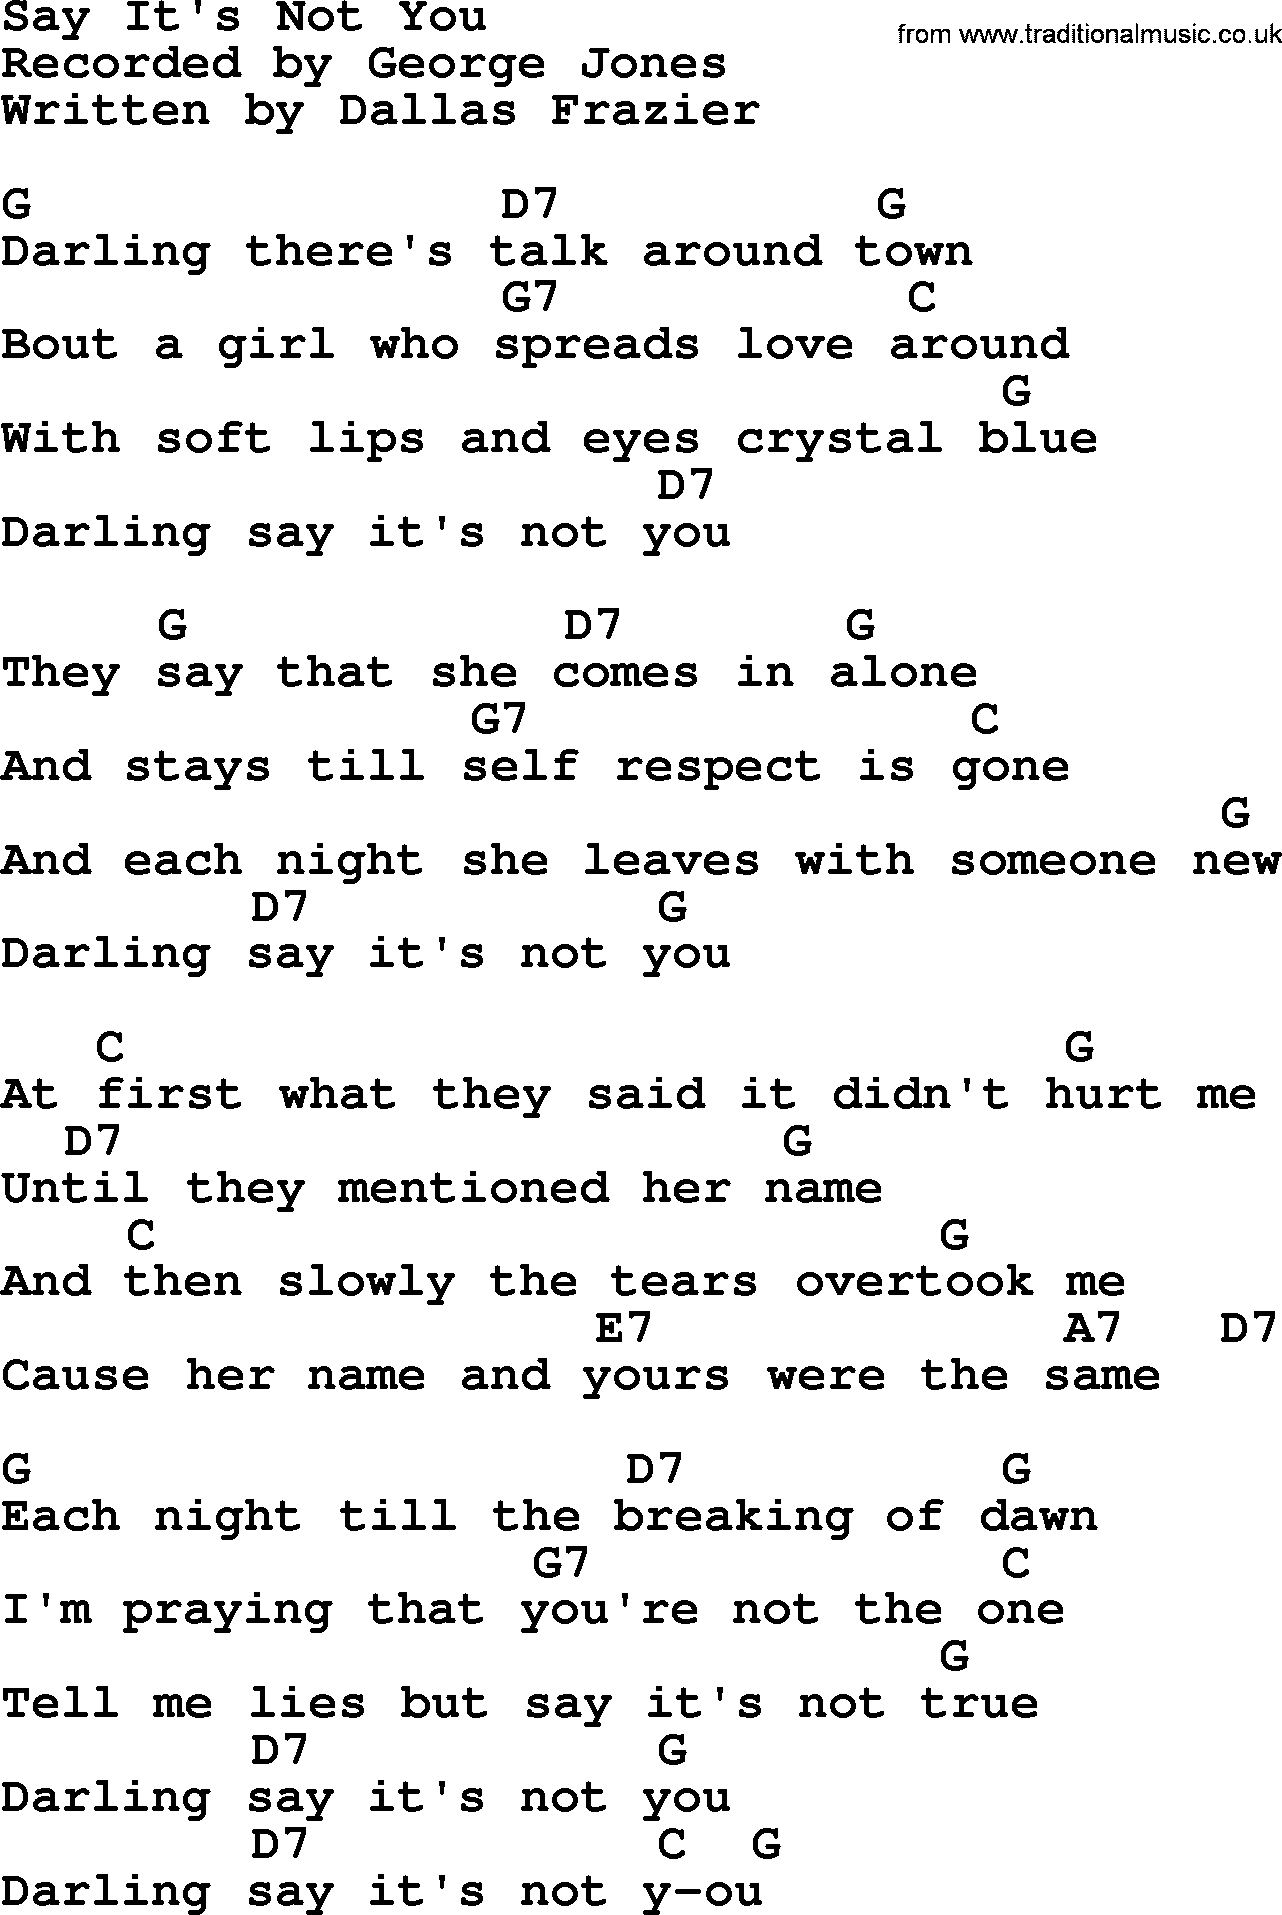 George Jones song: Say It's Not You, lyrics and chords